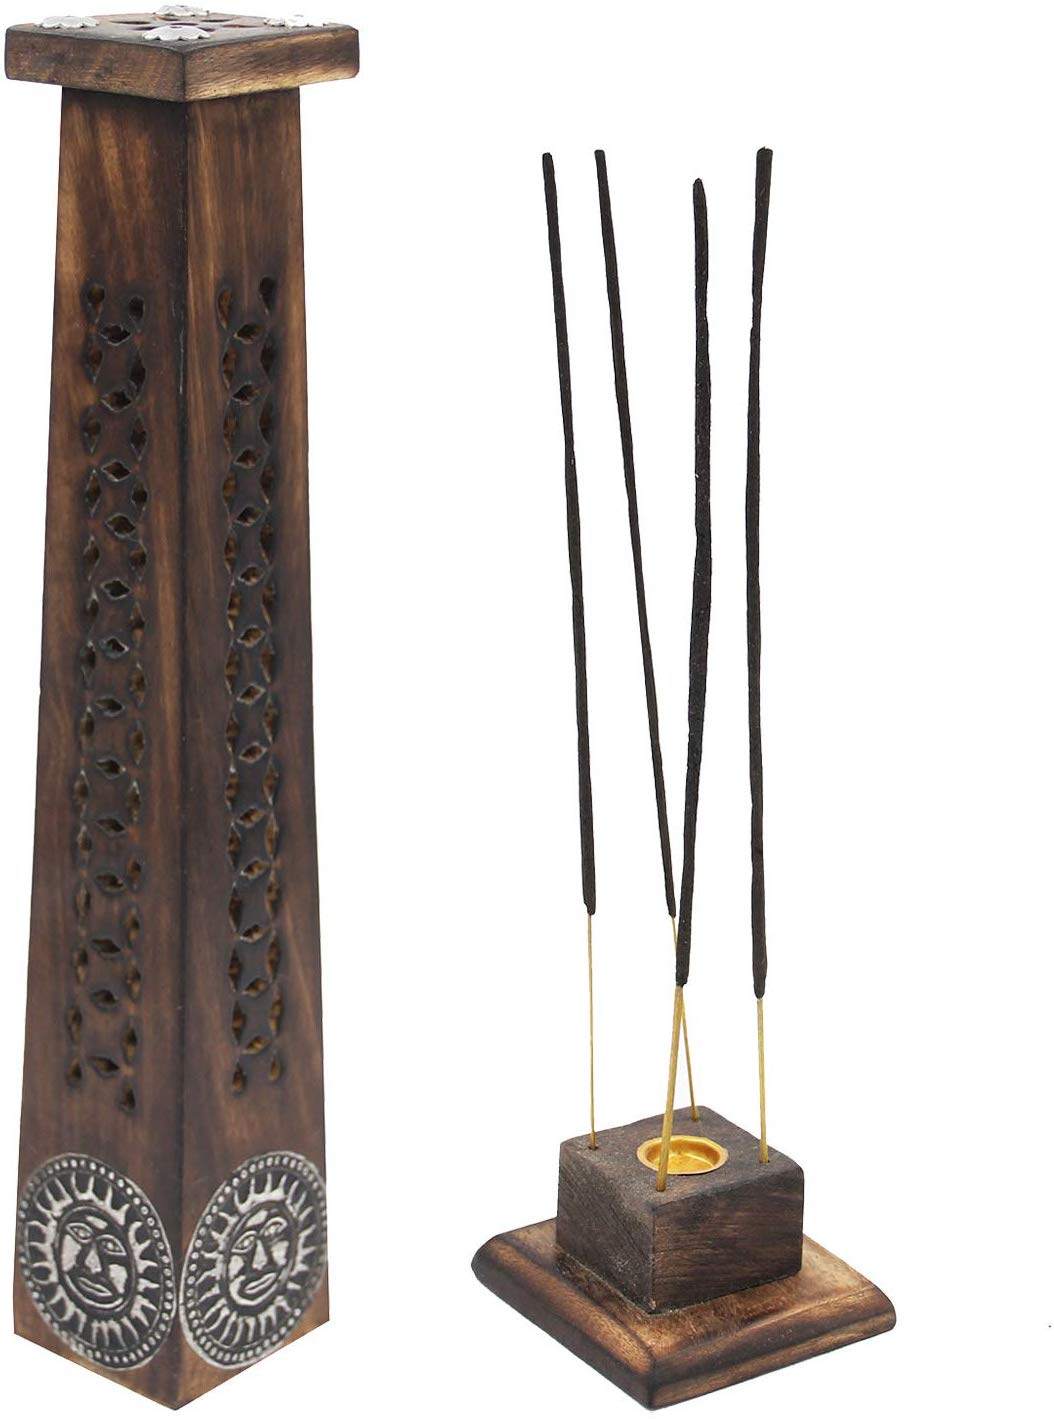 Wooden Artisan Decor Table Top Incense Stick Holder Burner Tower Stand (Sun) - DharmaObjects